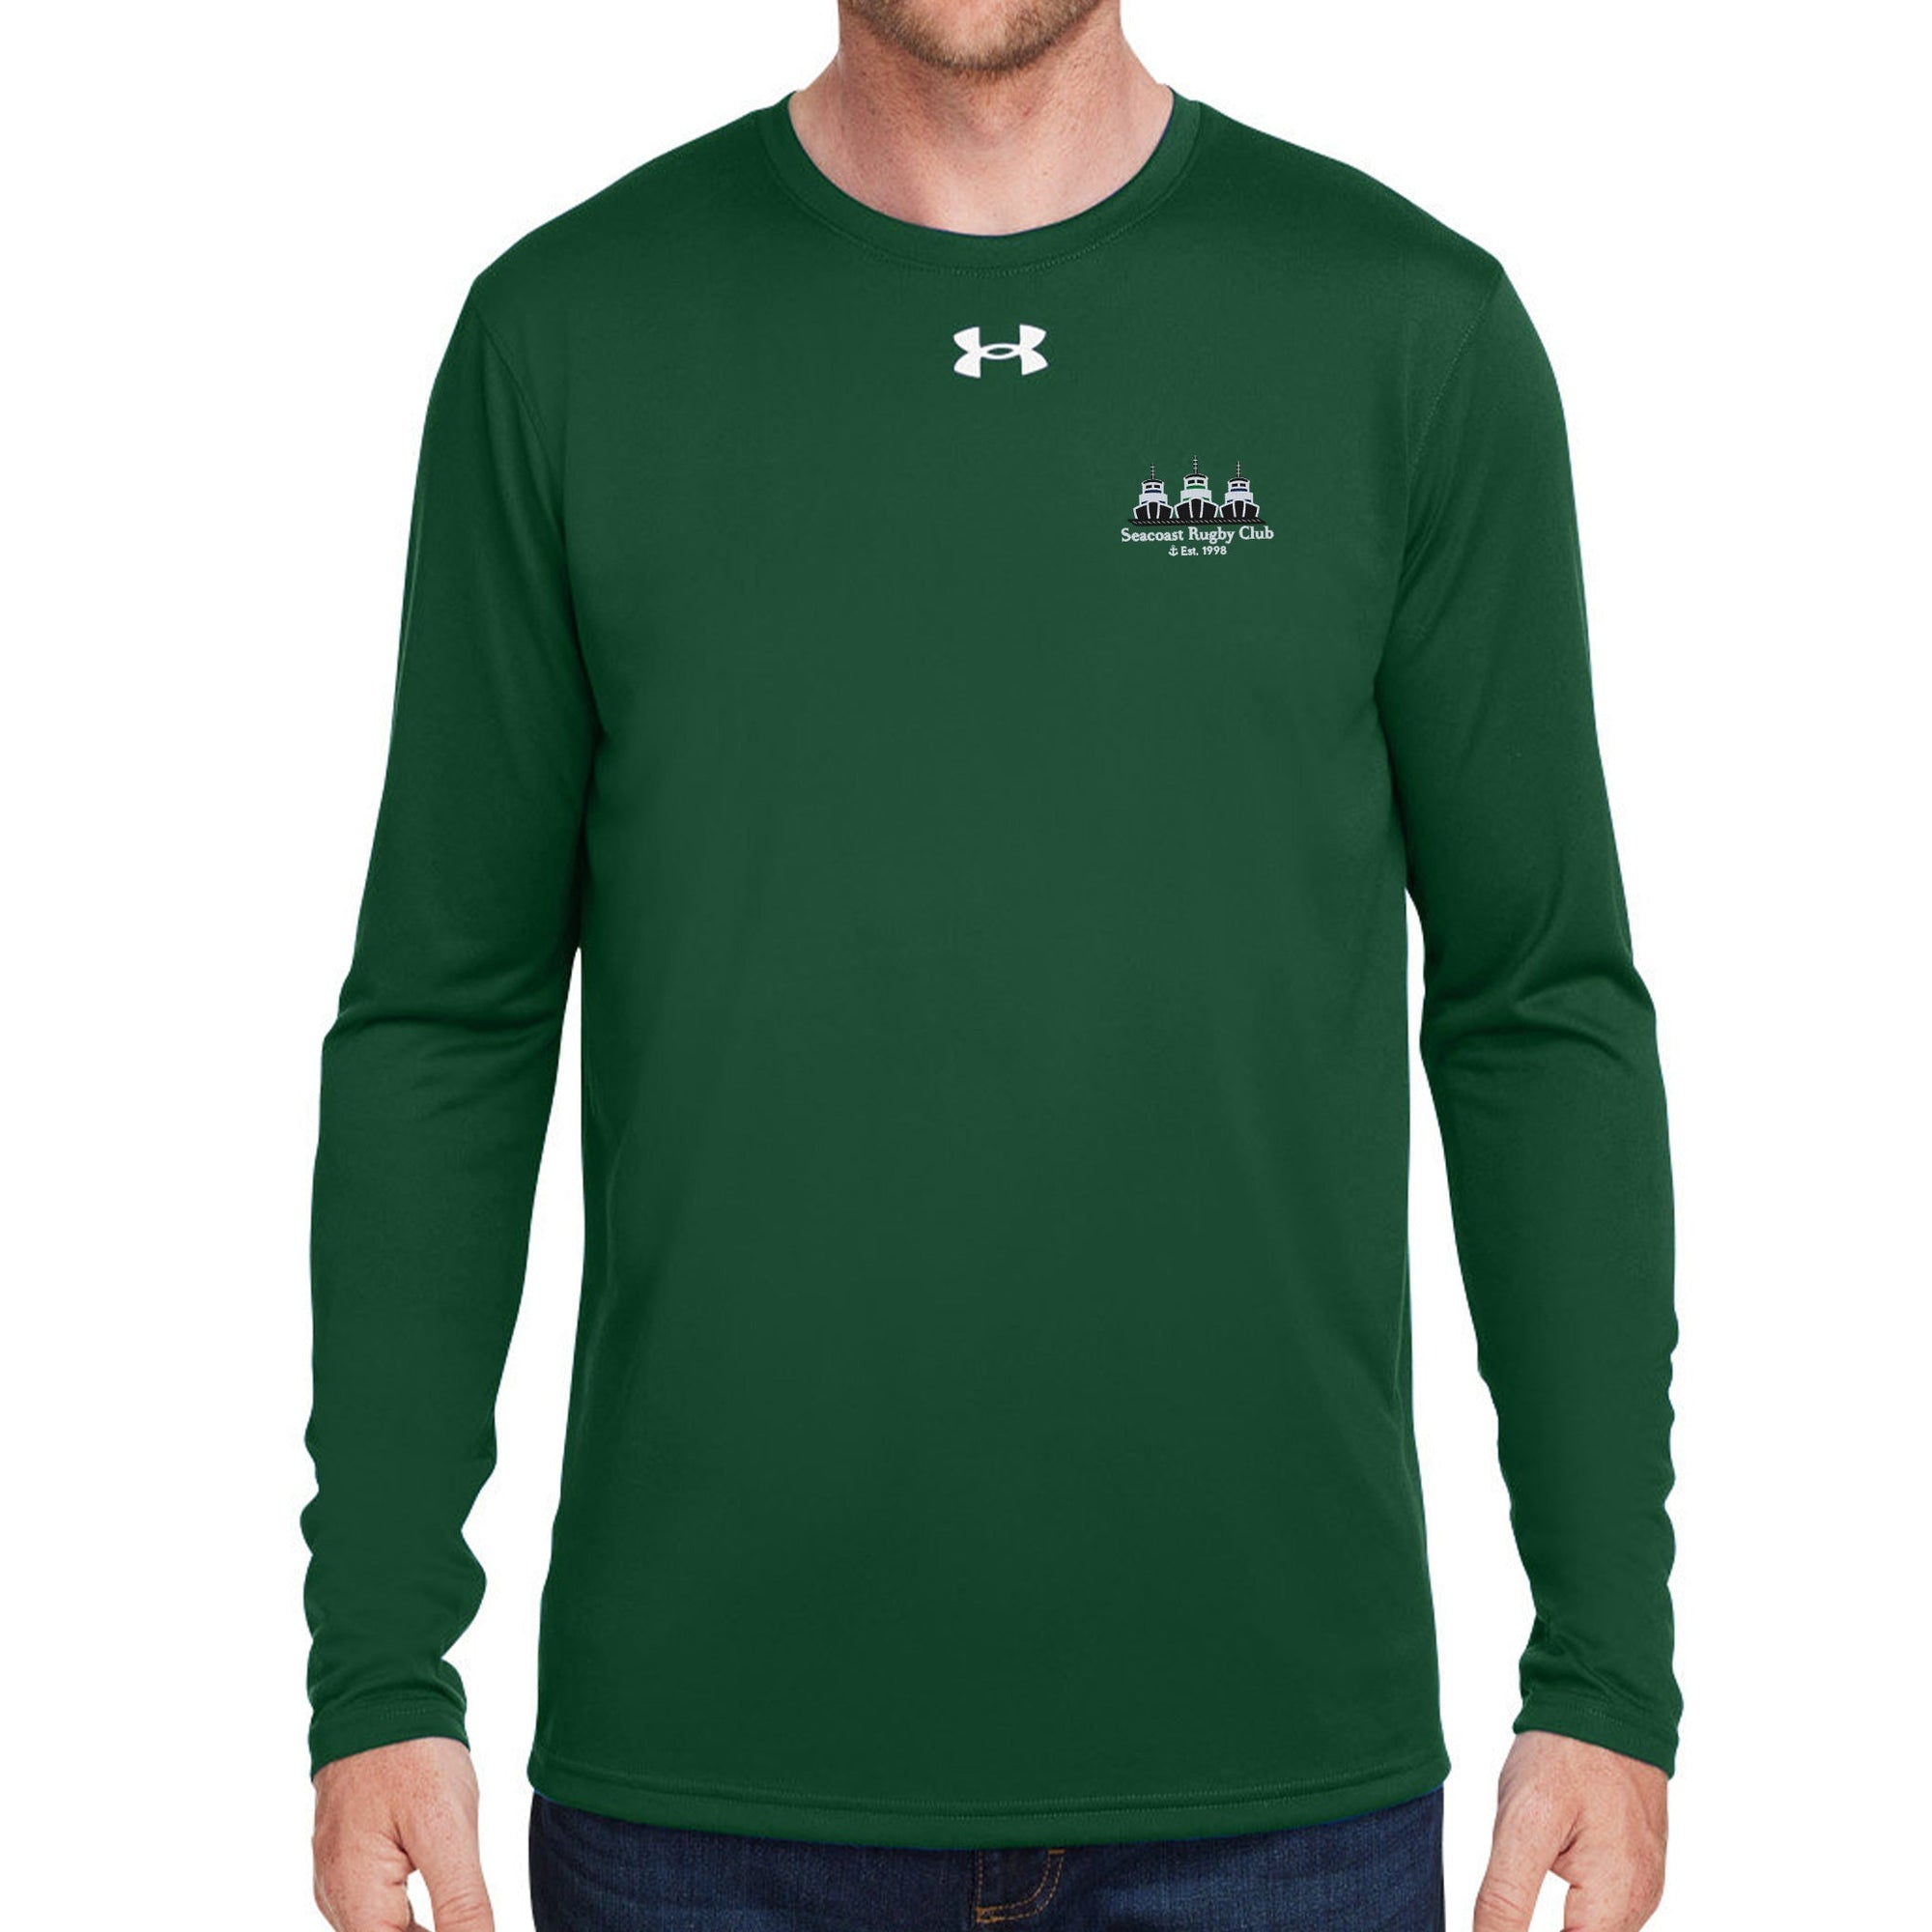 Rugby Imports Seacoast WR Tech LS T-Shirt